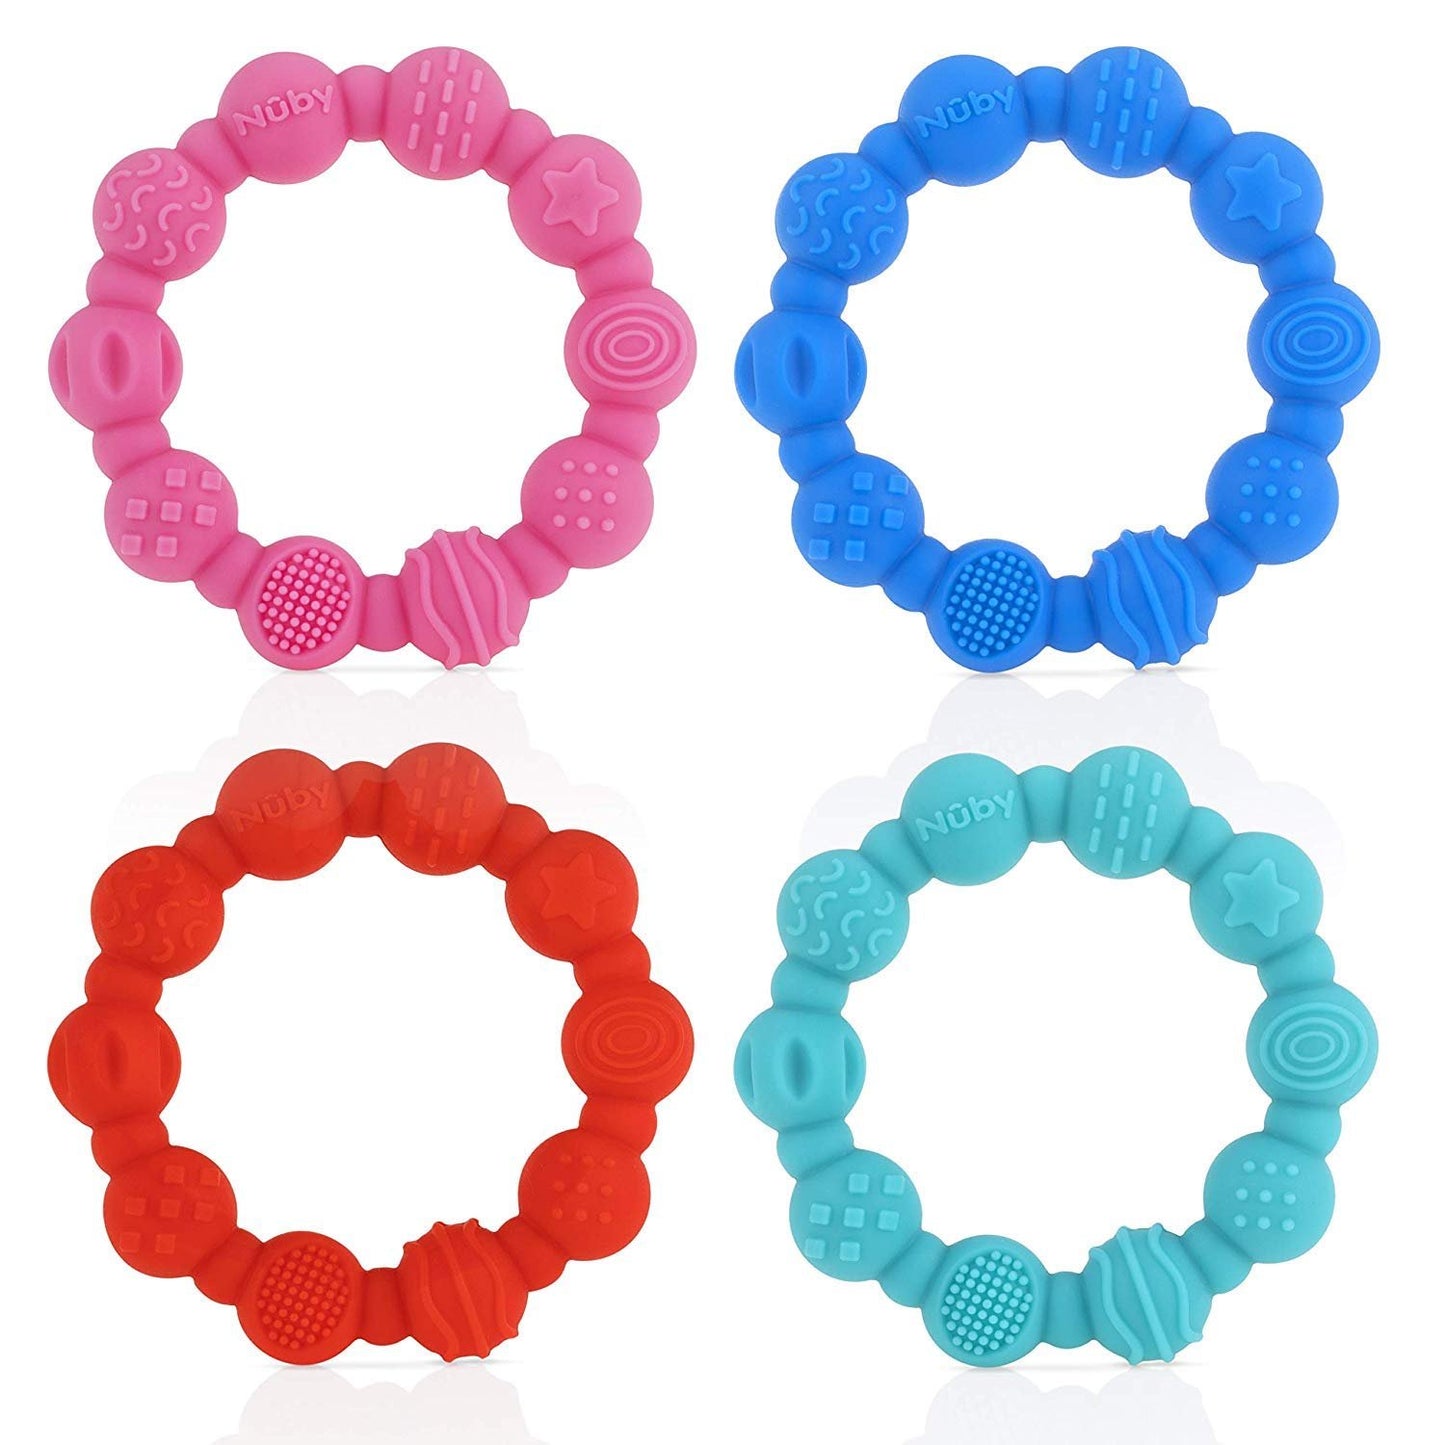 100% Silicone Teether Ring, 3 Months + (Aqua)